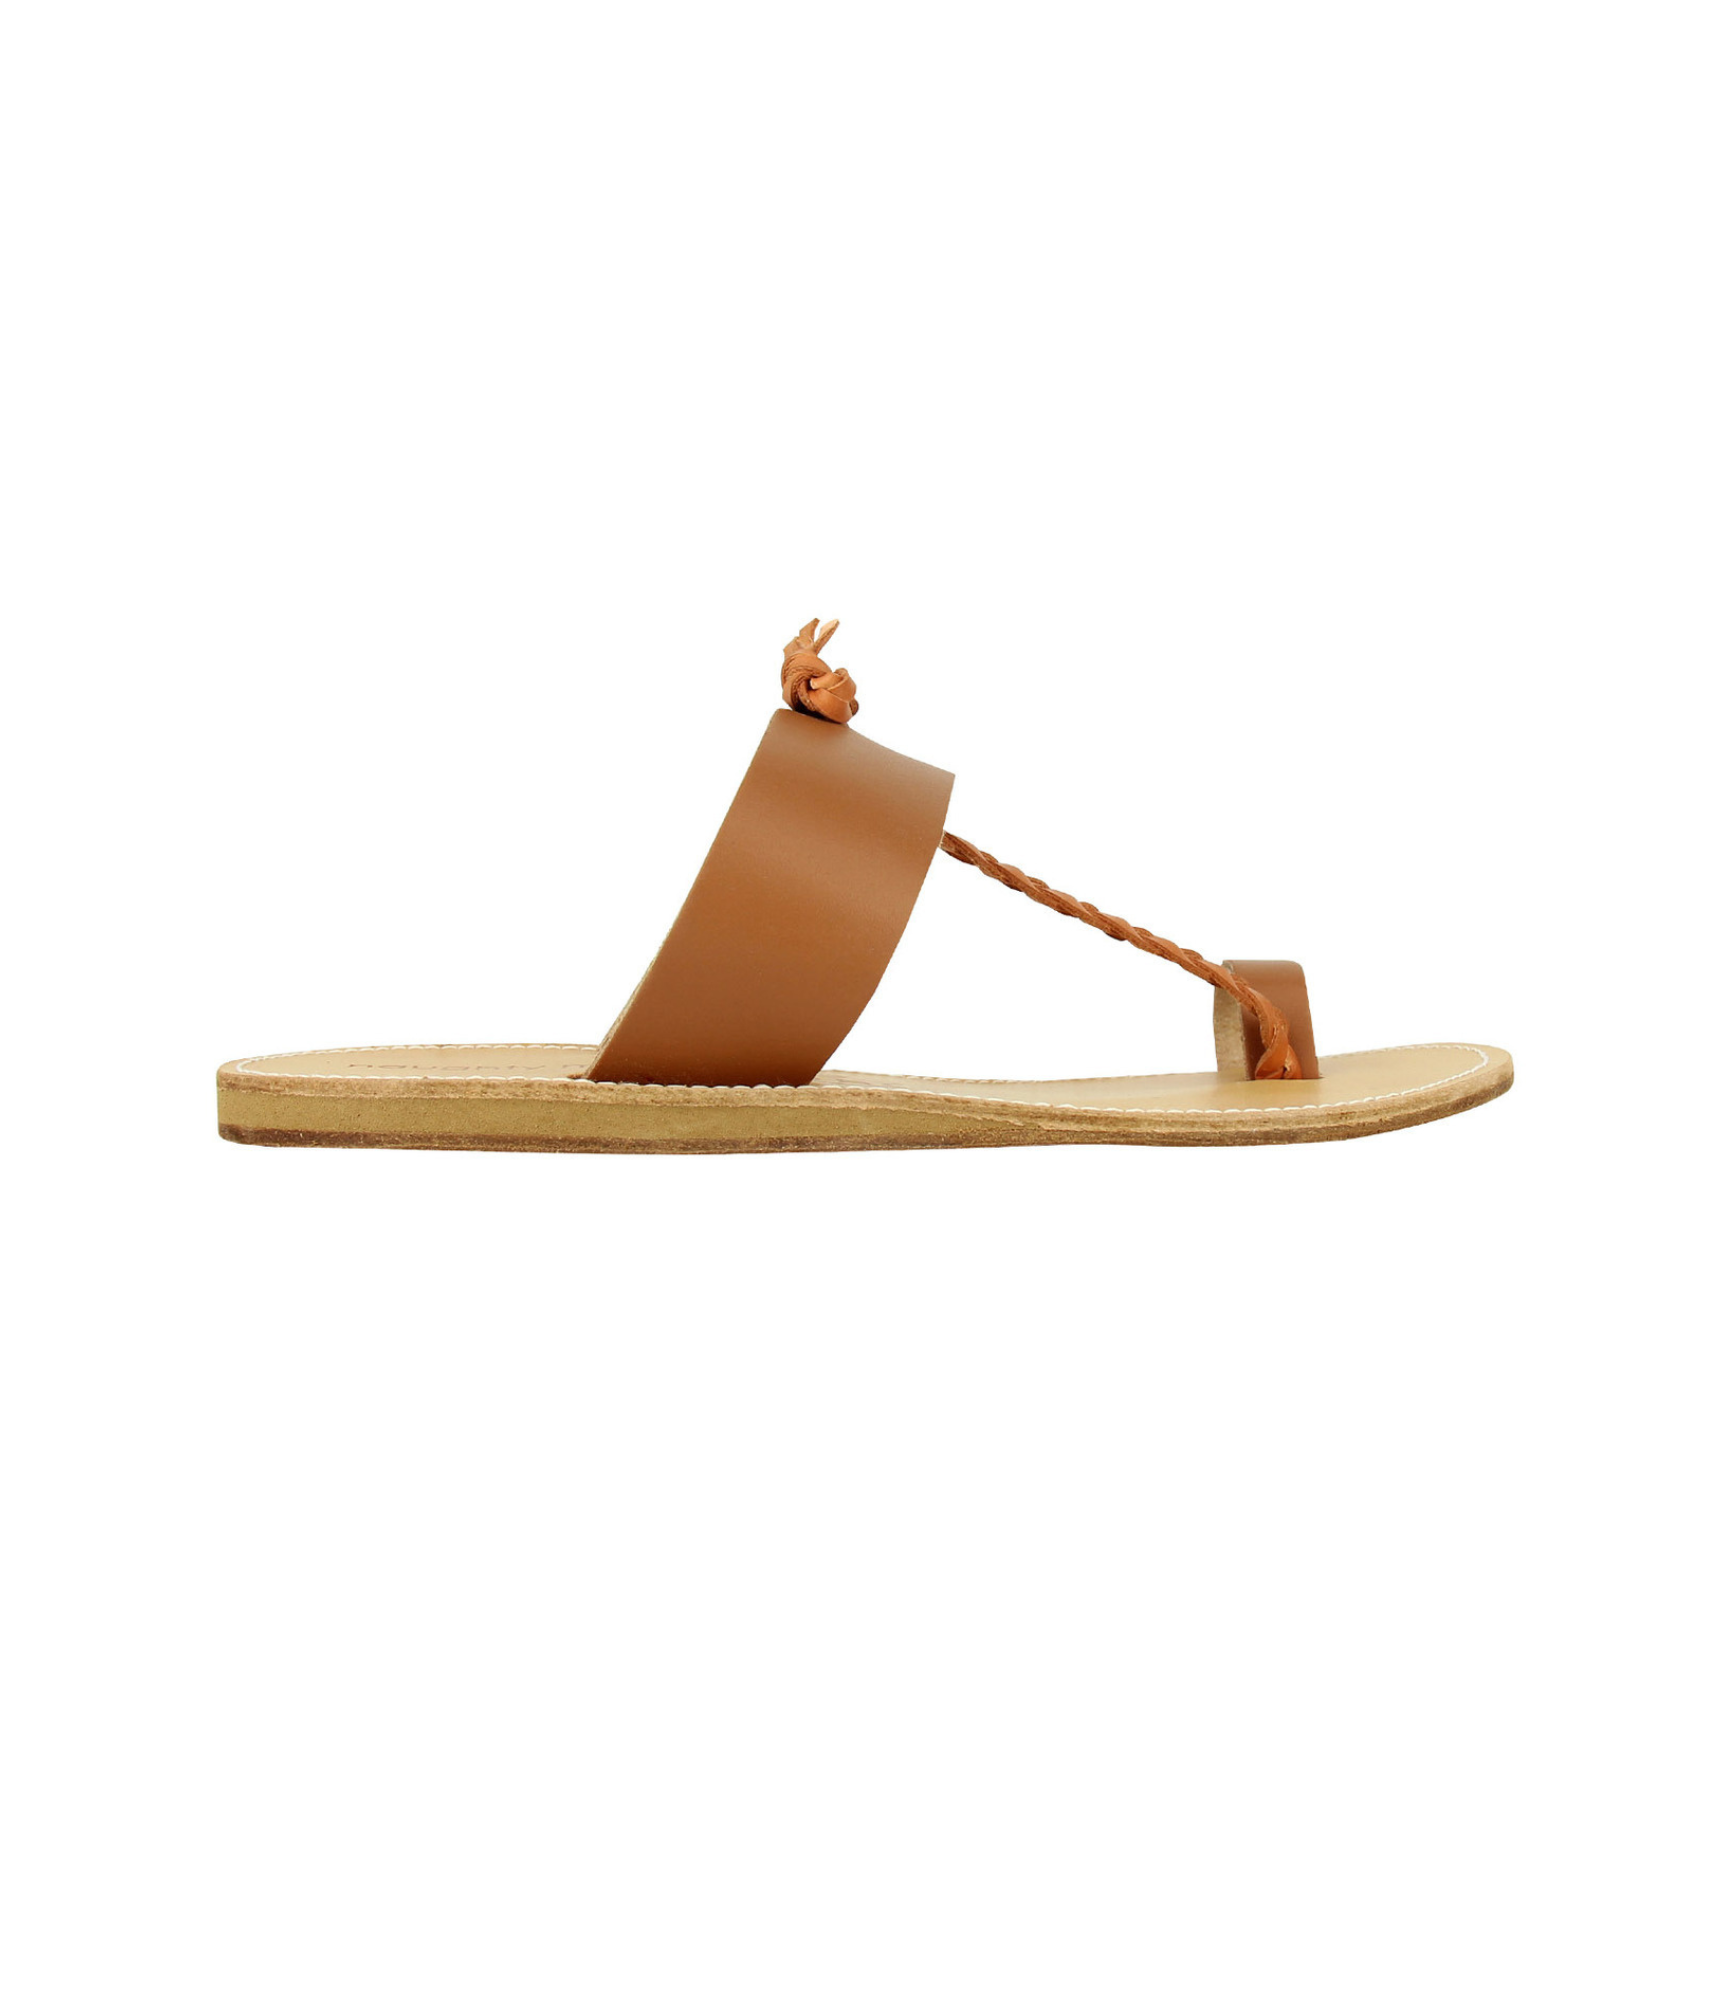 Thess Sandals in Natural Leather